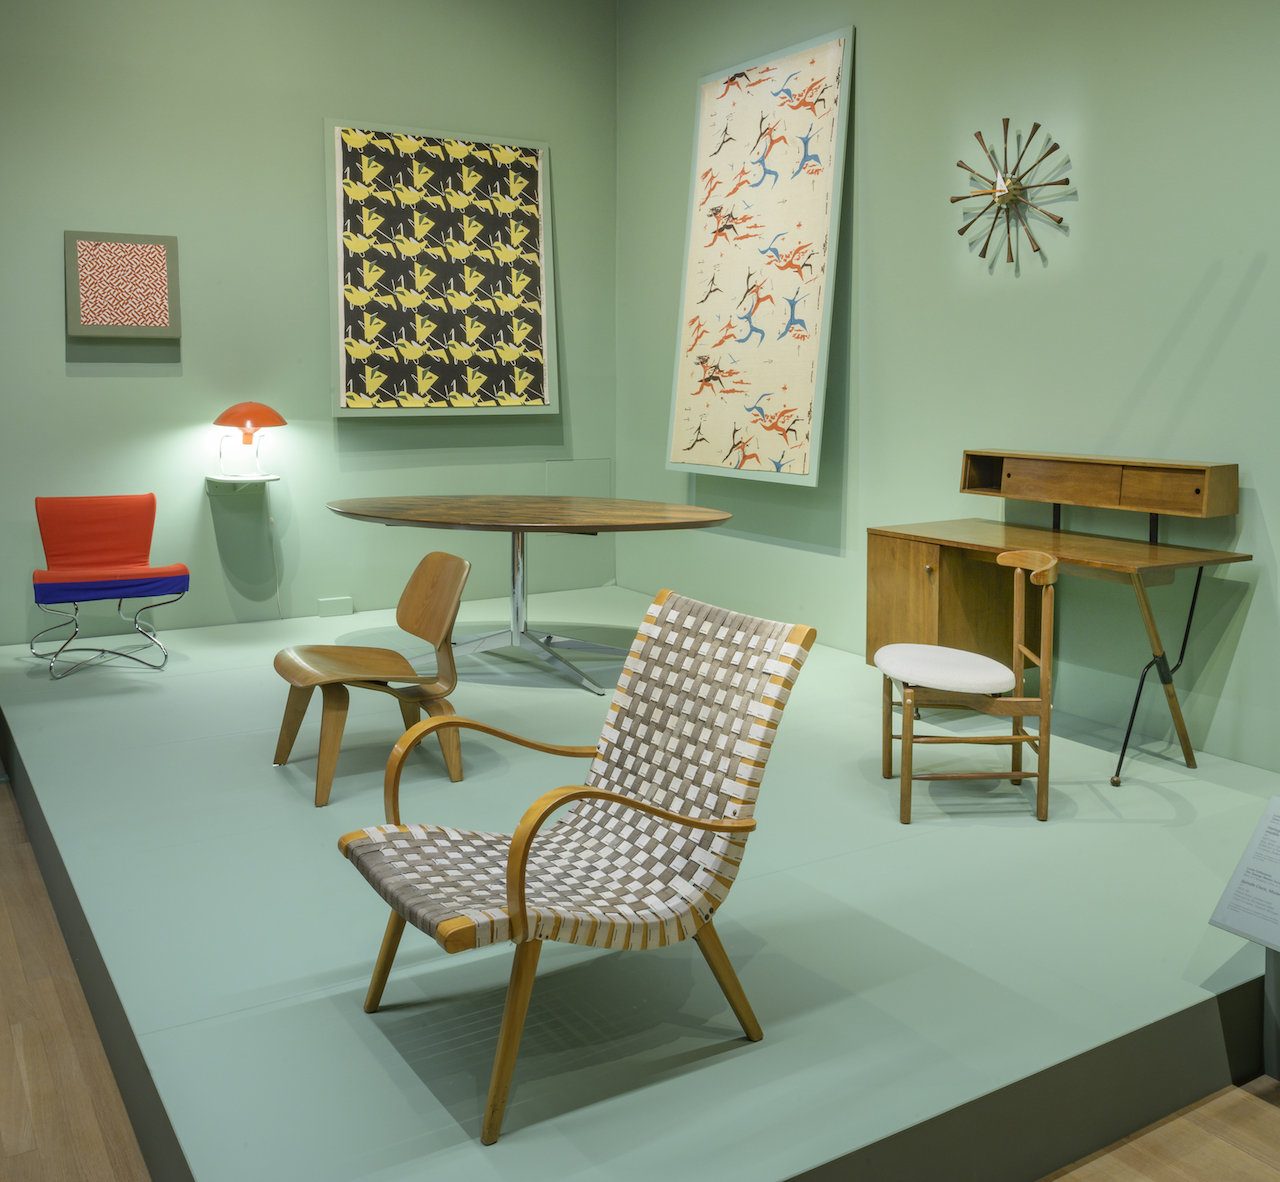 Montreal Museum of Fine Arts exhibition Parall(elles): A History of Women in Design
